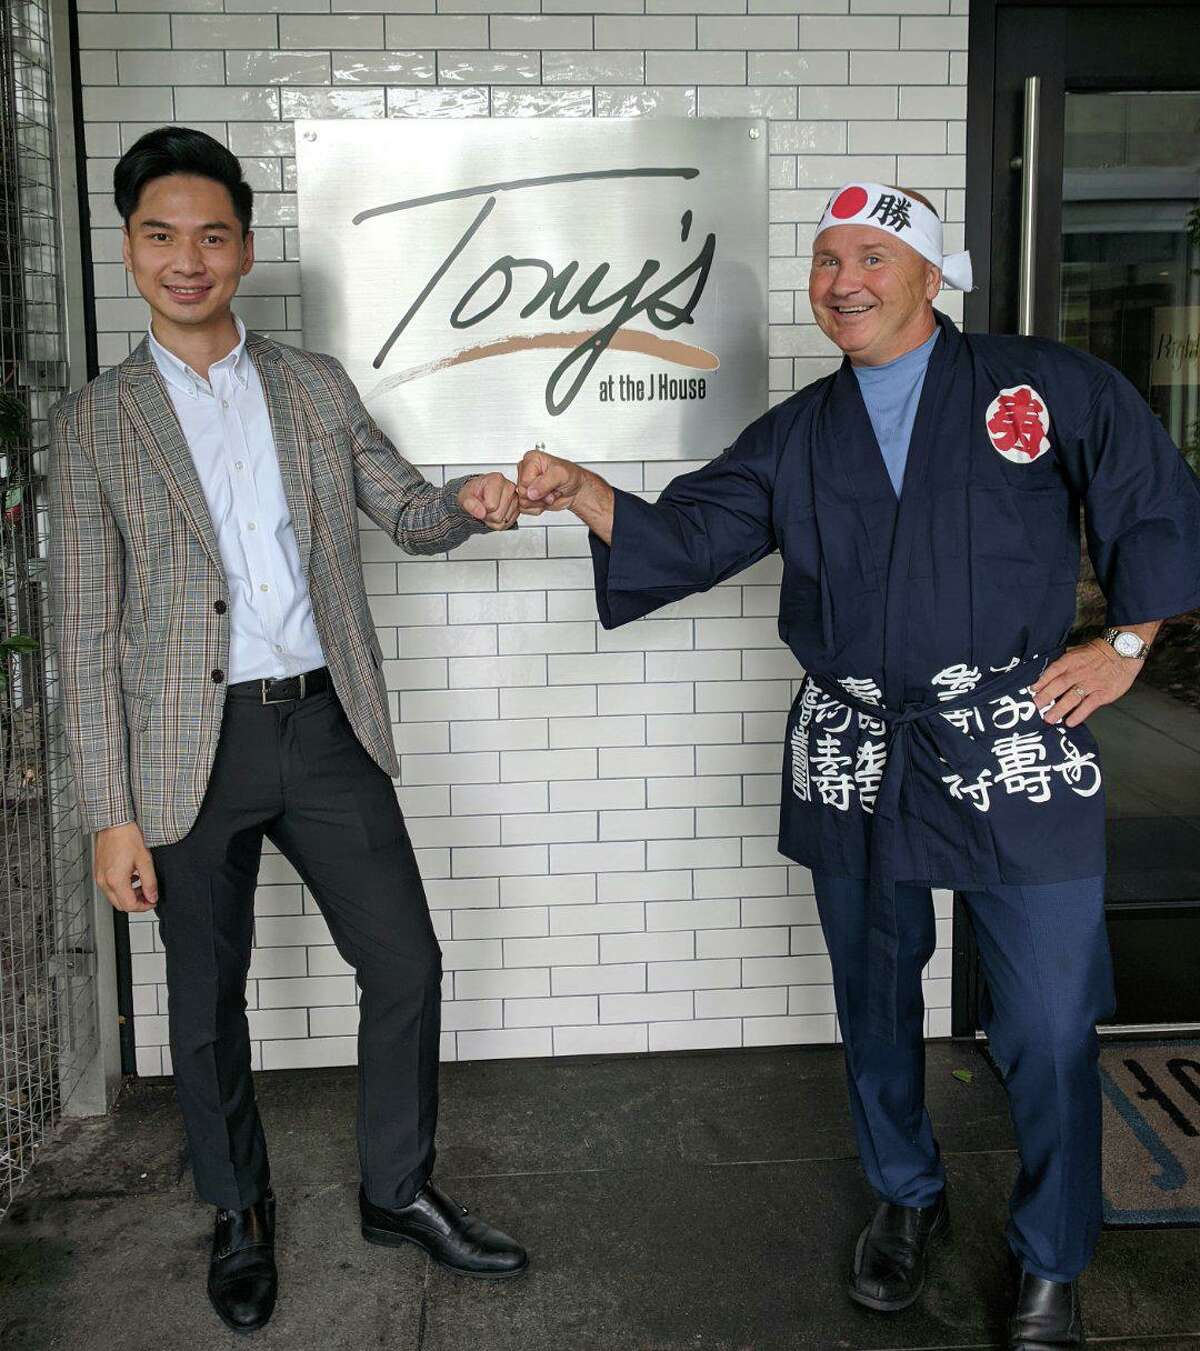 MIKU Sushi owner K Dong with Tony Capasso, owner of Tony’s at the JHOUSE, where they are joining forces to later this month with a pop-up eatery.